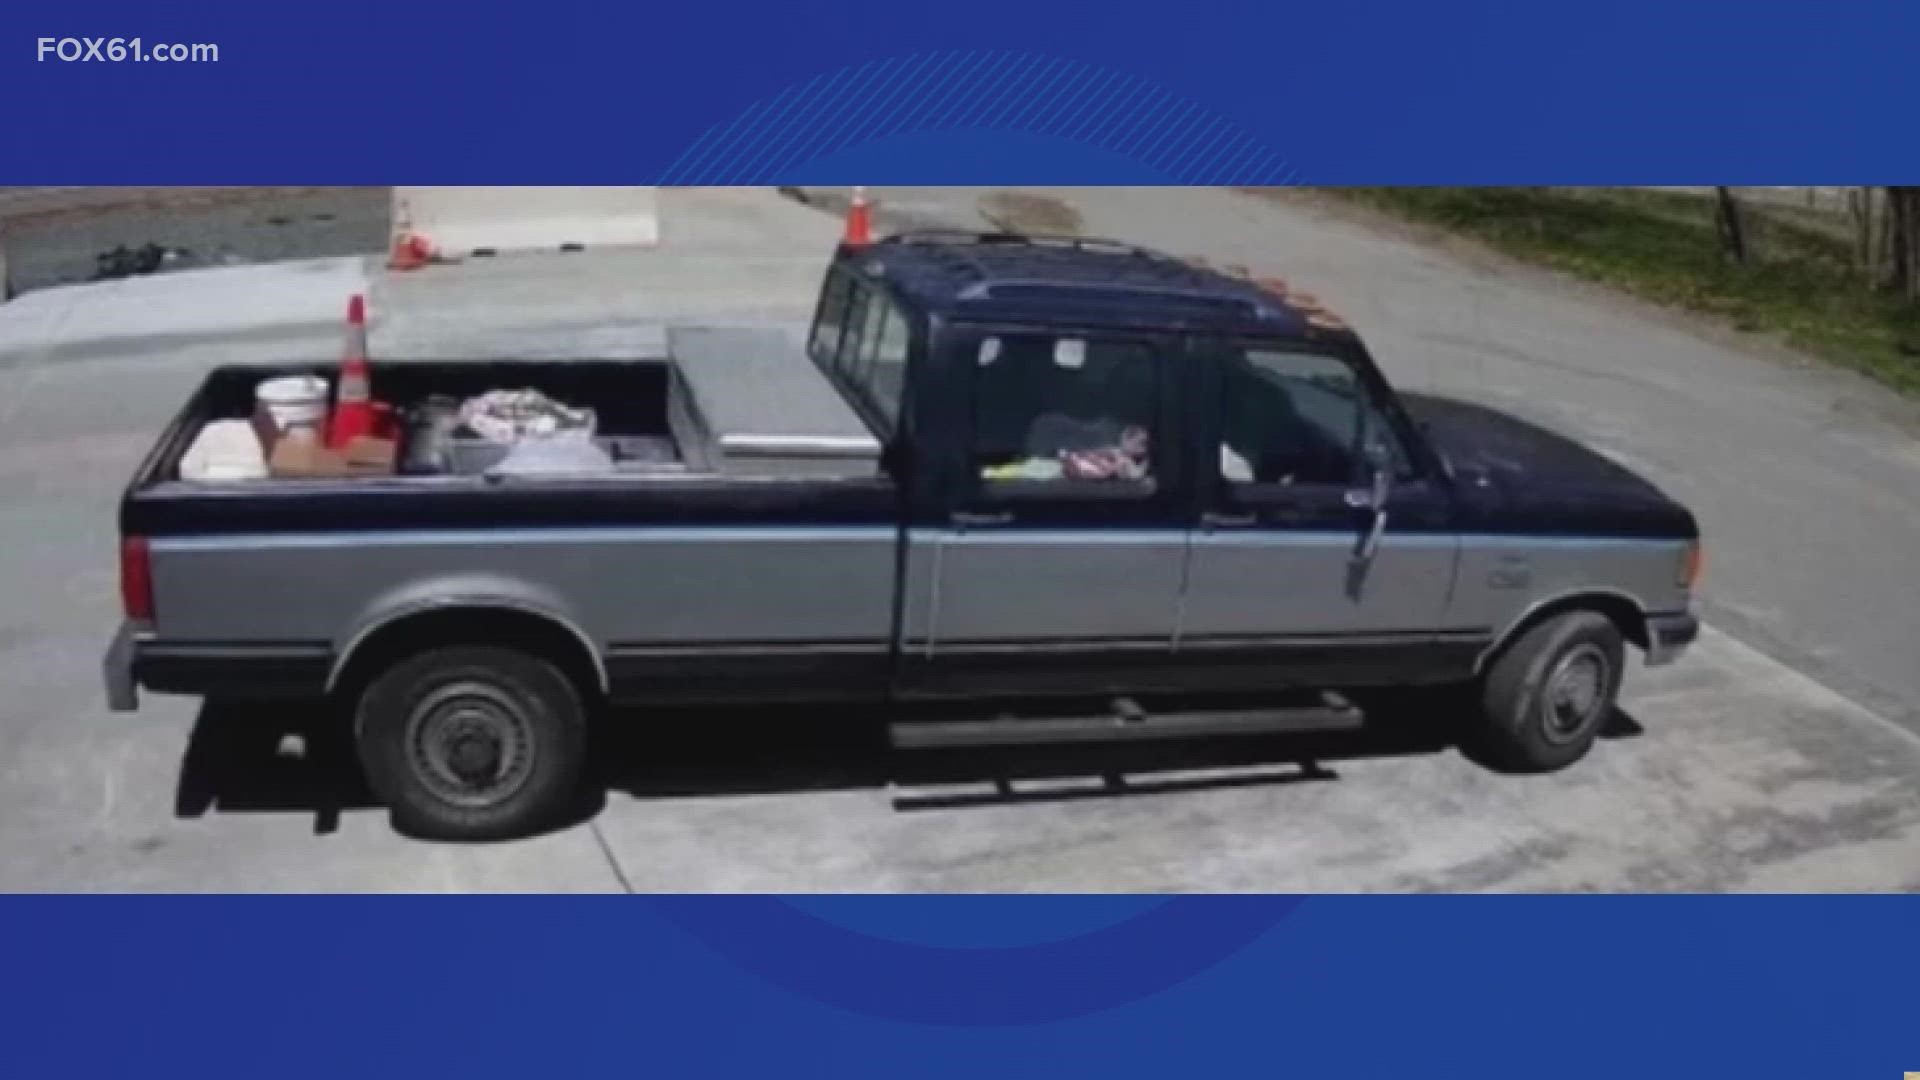 Police say the person of interest is believed to be driving a 1989 Ford F-350 vehicle with a Minnesota license plate.